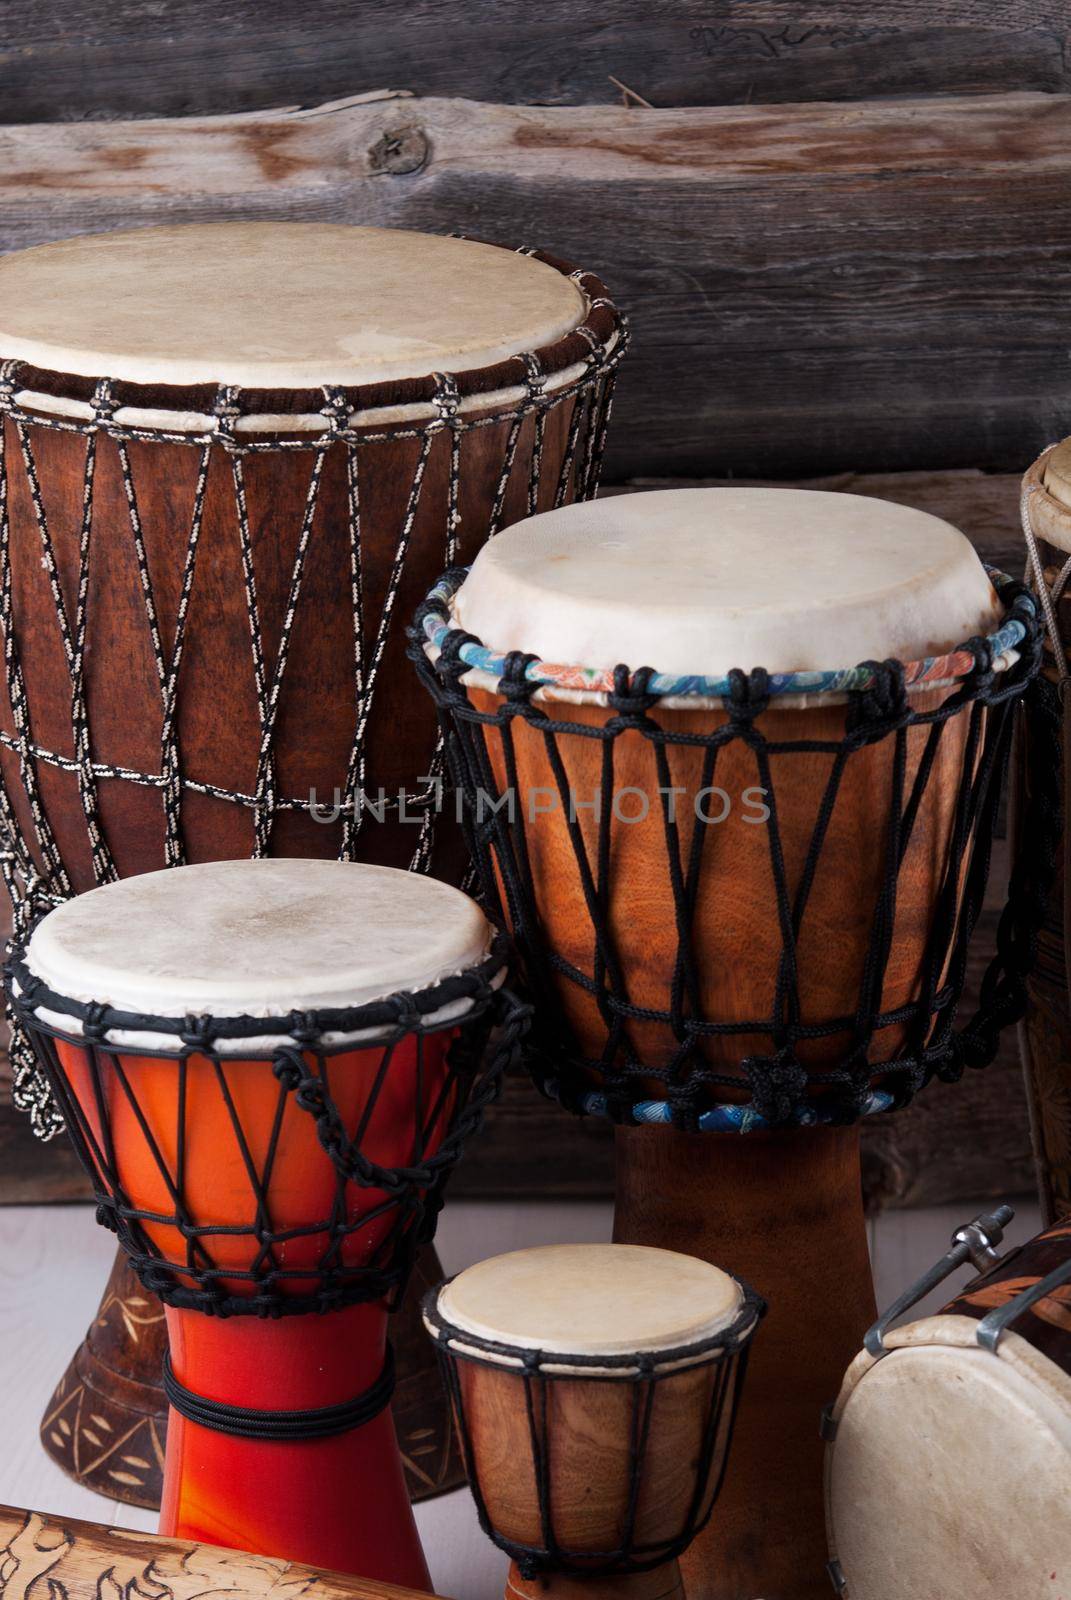 variation of ethnic drums different sizes from small to huge